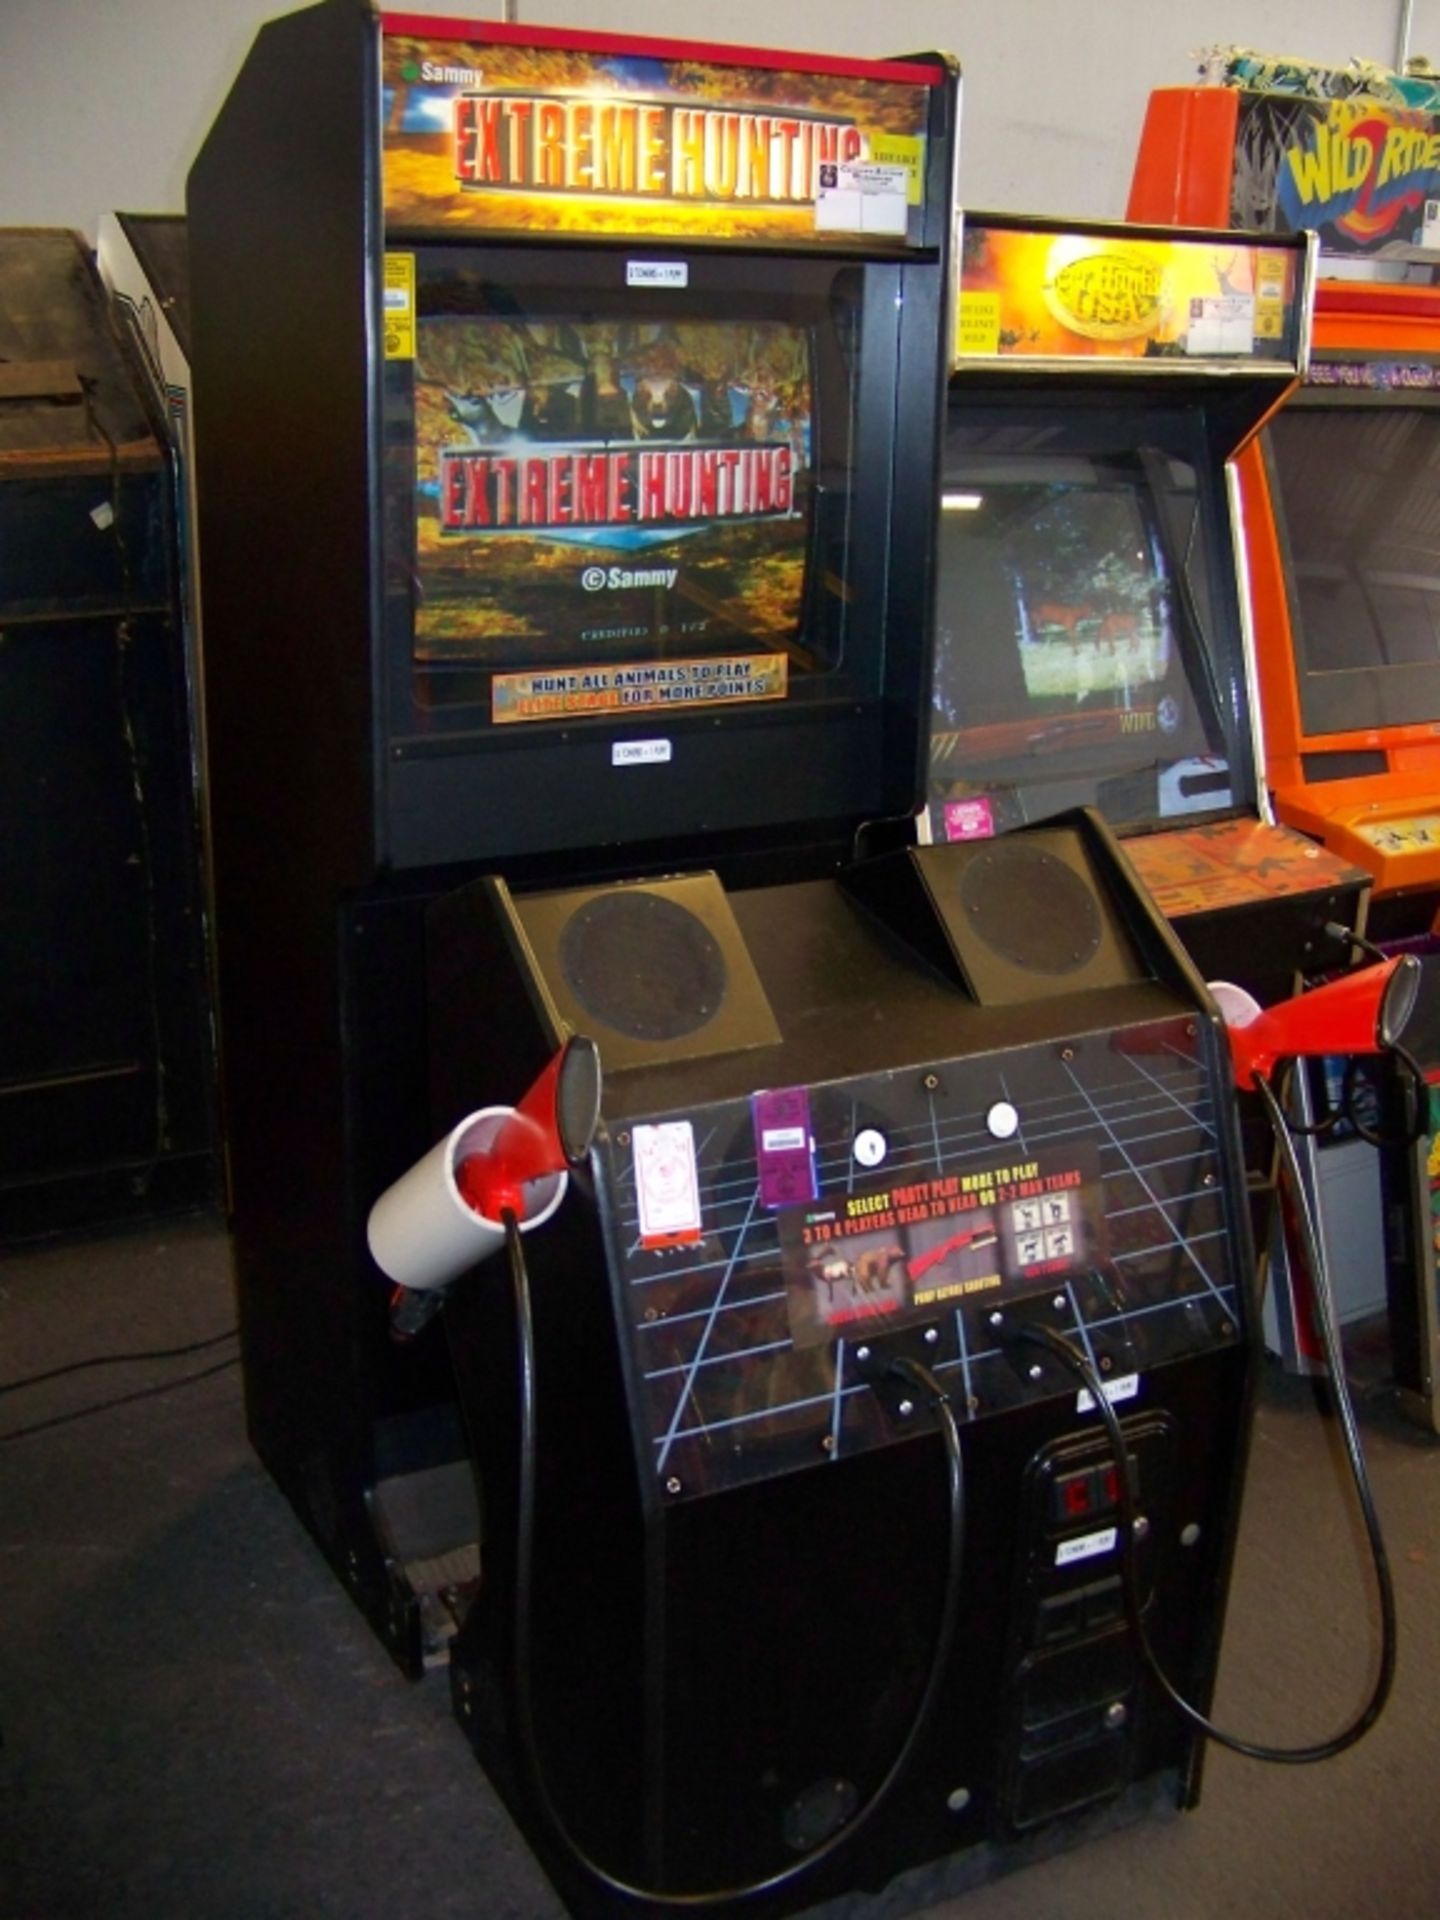 EXTREME HUNTING UPRIGHT DEADEYE CAB ARCADE GAME Item is in used condition. Evidence of wear and